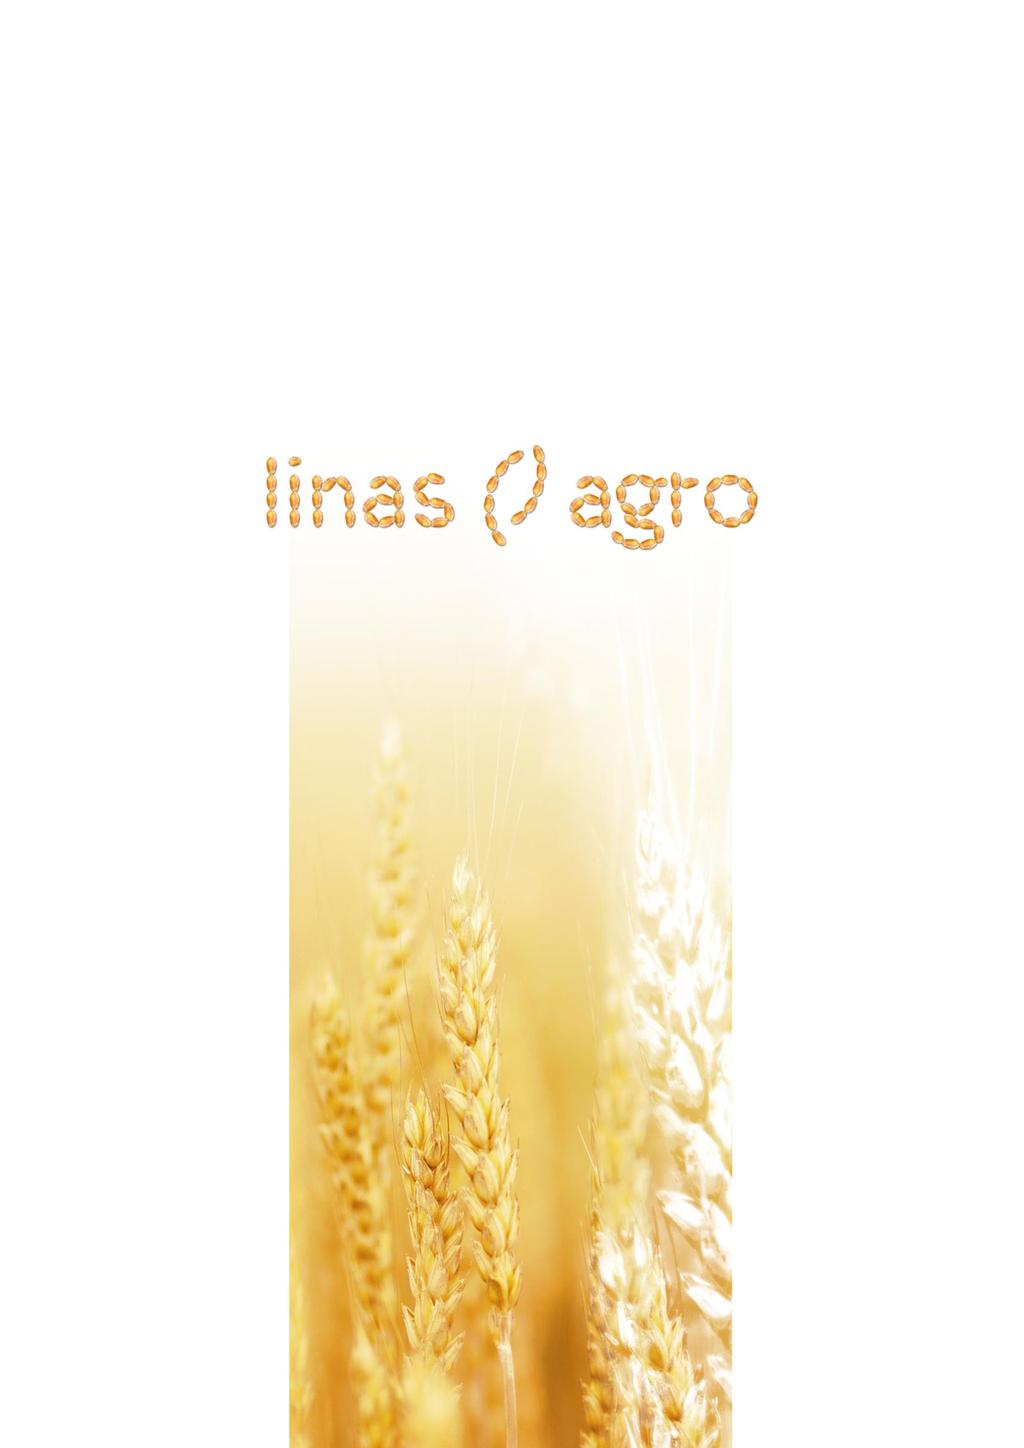 AB LINAS AGRO GROUP CONSOLIDATED FINANCIAL STATEMENTS FOR THE 9 MONTH PERIOD OF THE YEAR 2013/2014 (UNAUDITED)